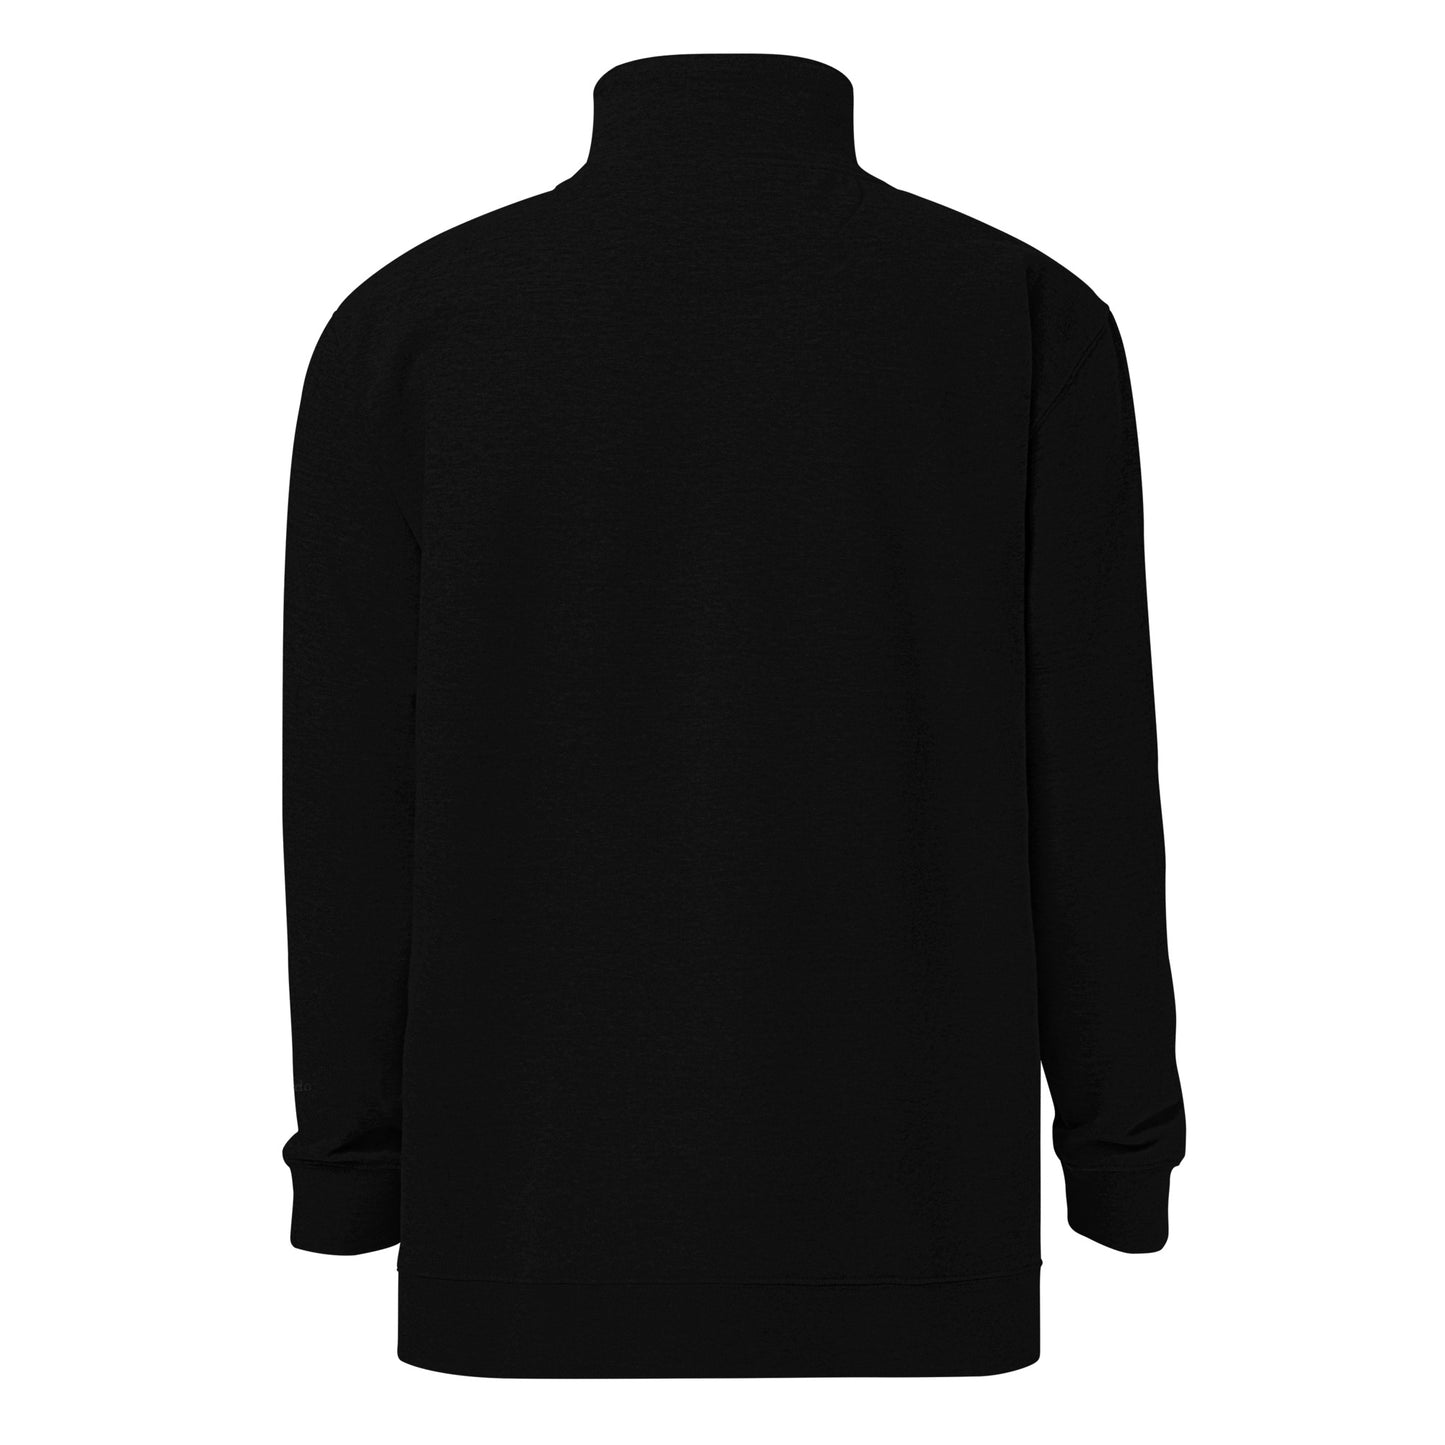 Embroidered Unisex fleece pullover - A Black Woman Made Me